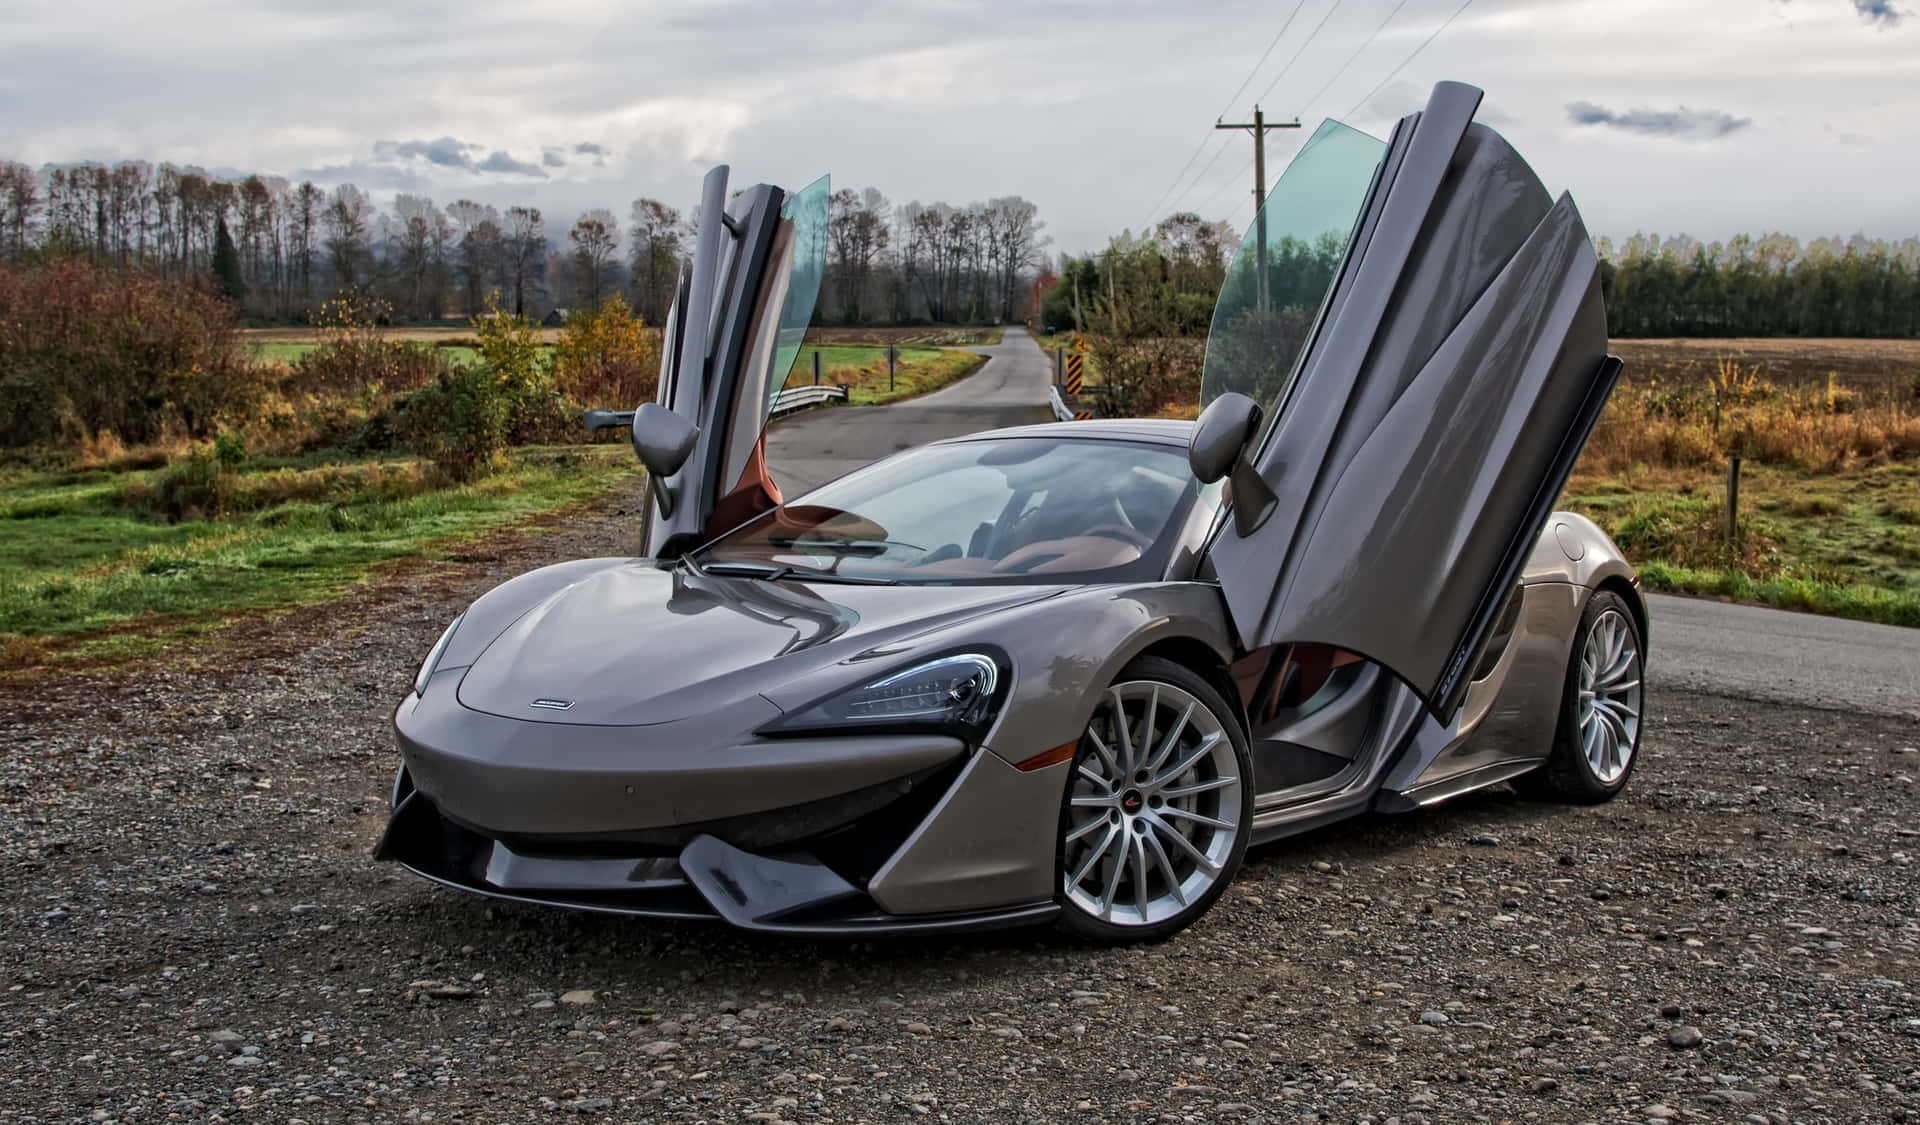 "Experience the Unrivaled Adrenaline of Driving a Mclaren"